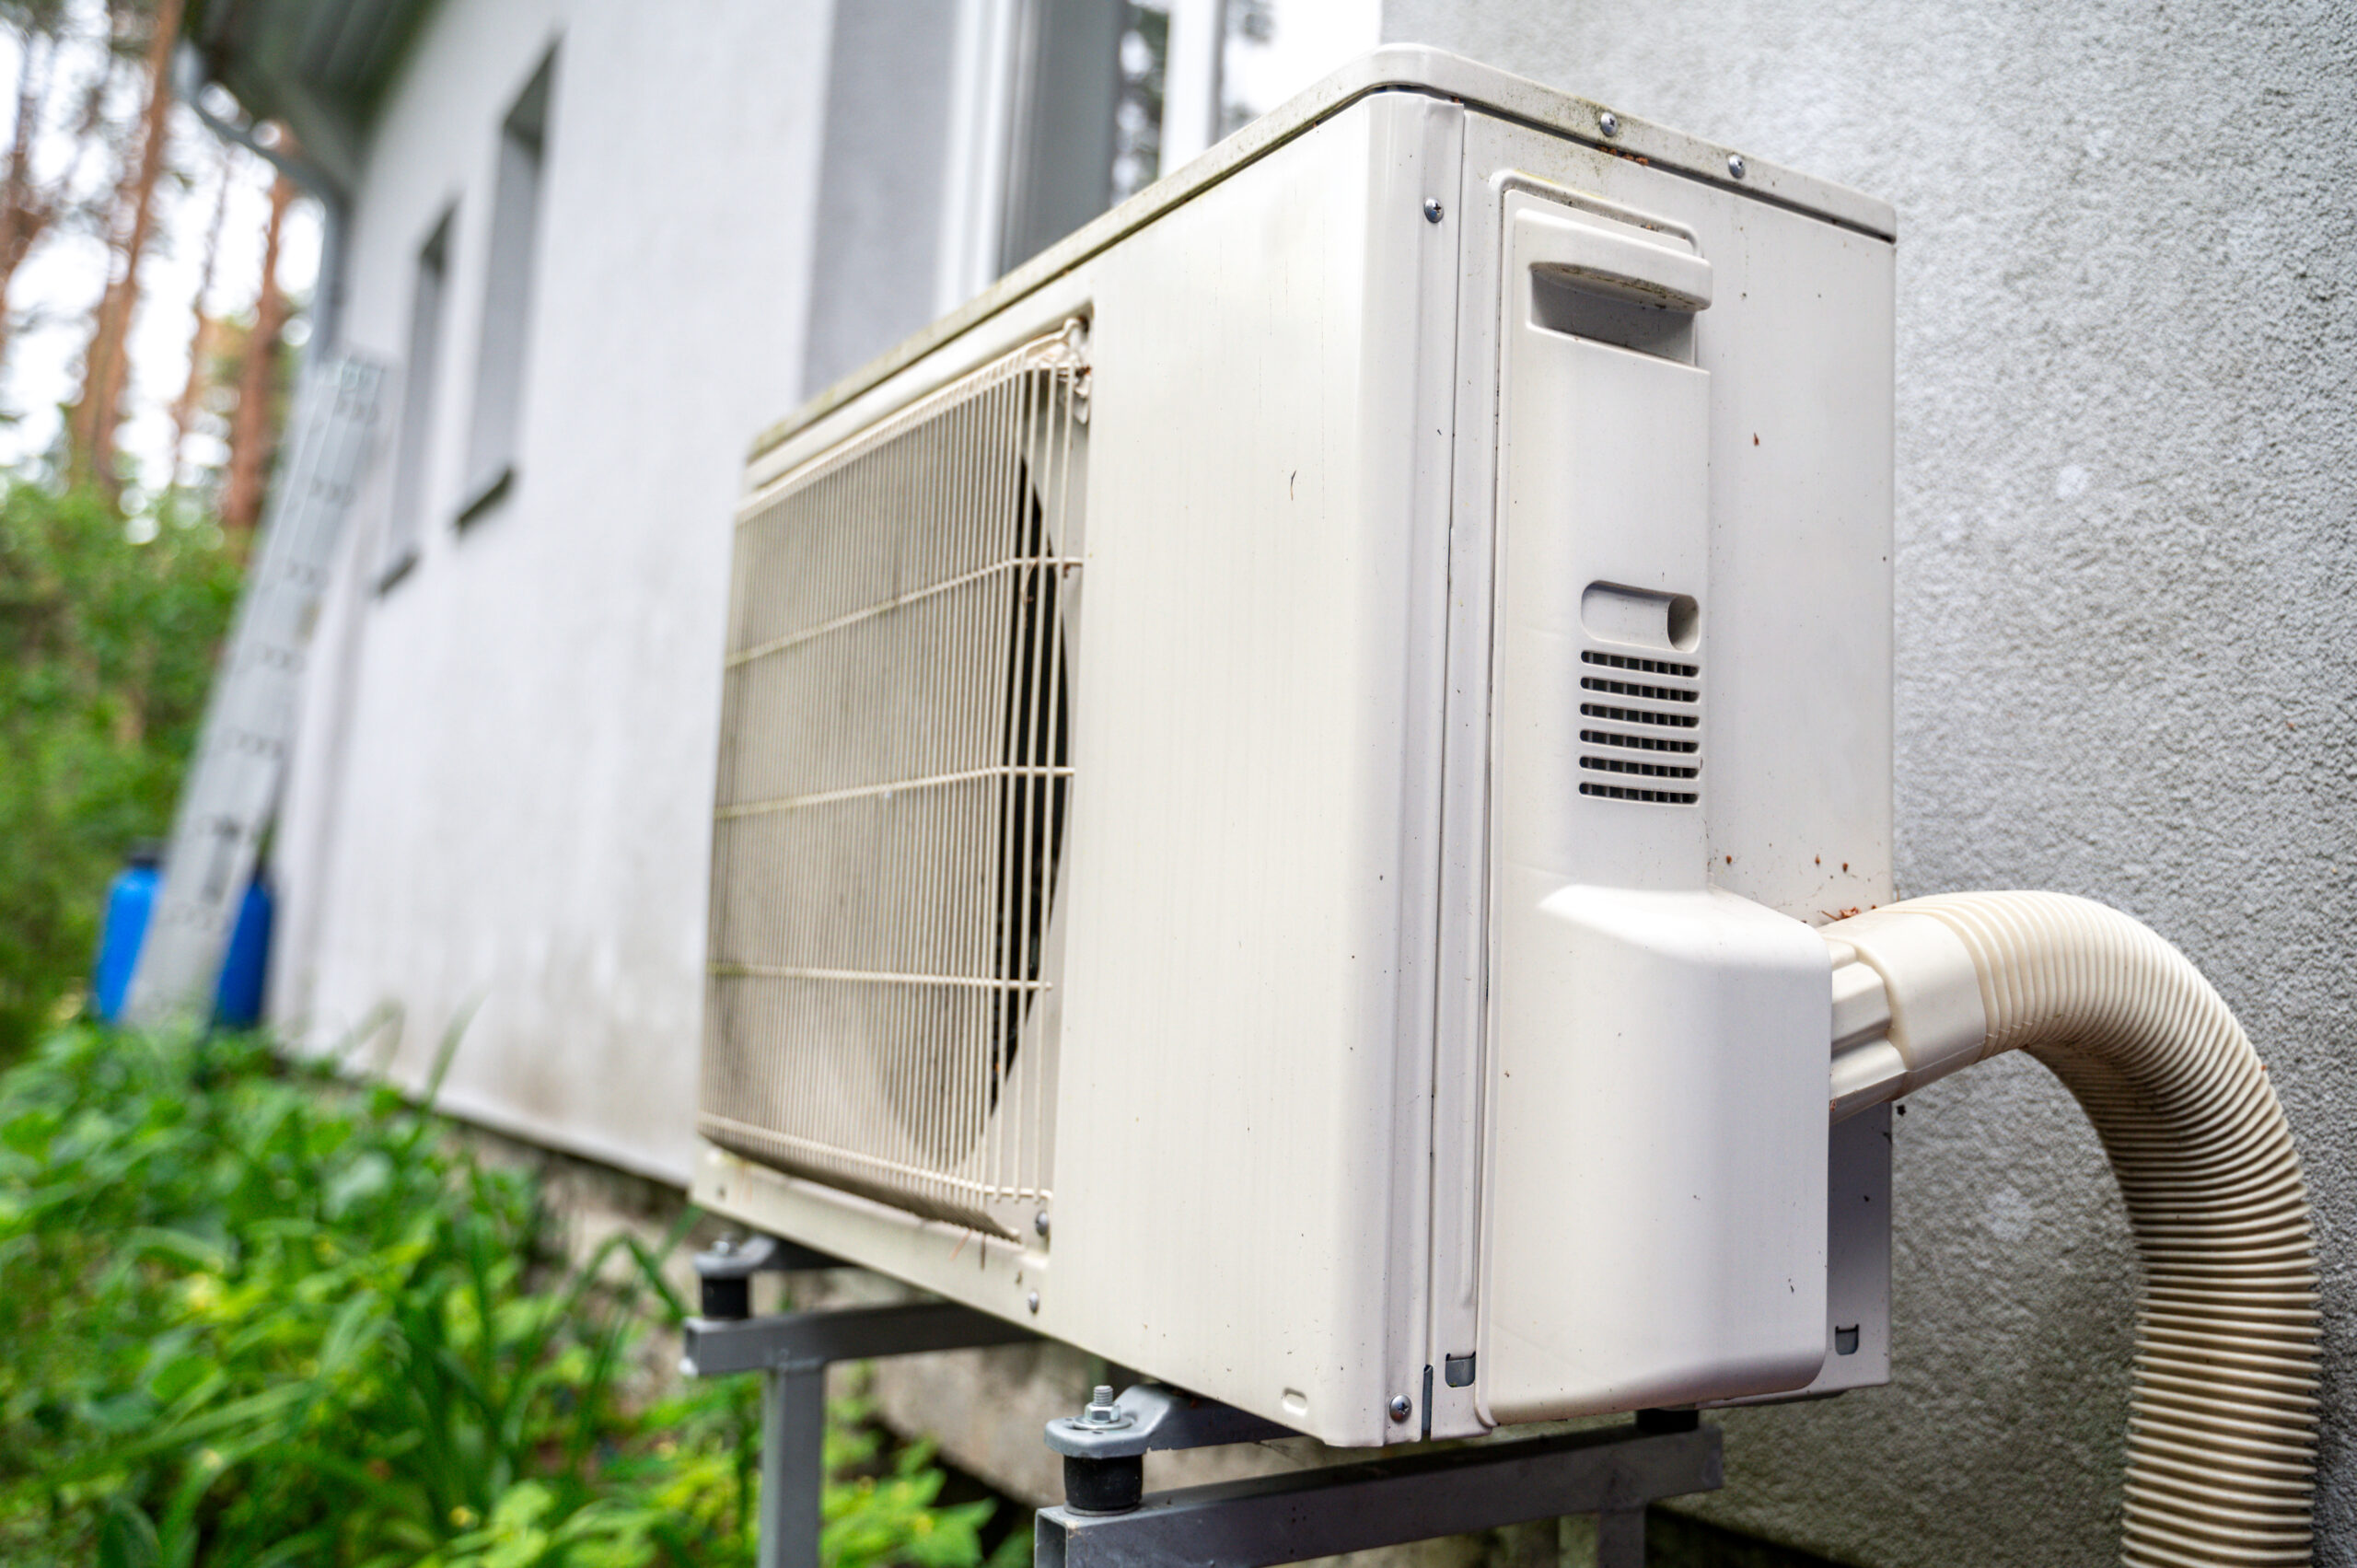 Heat pump outside of residential house